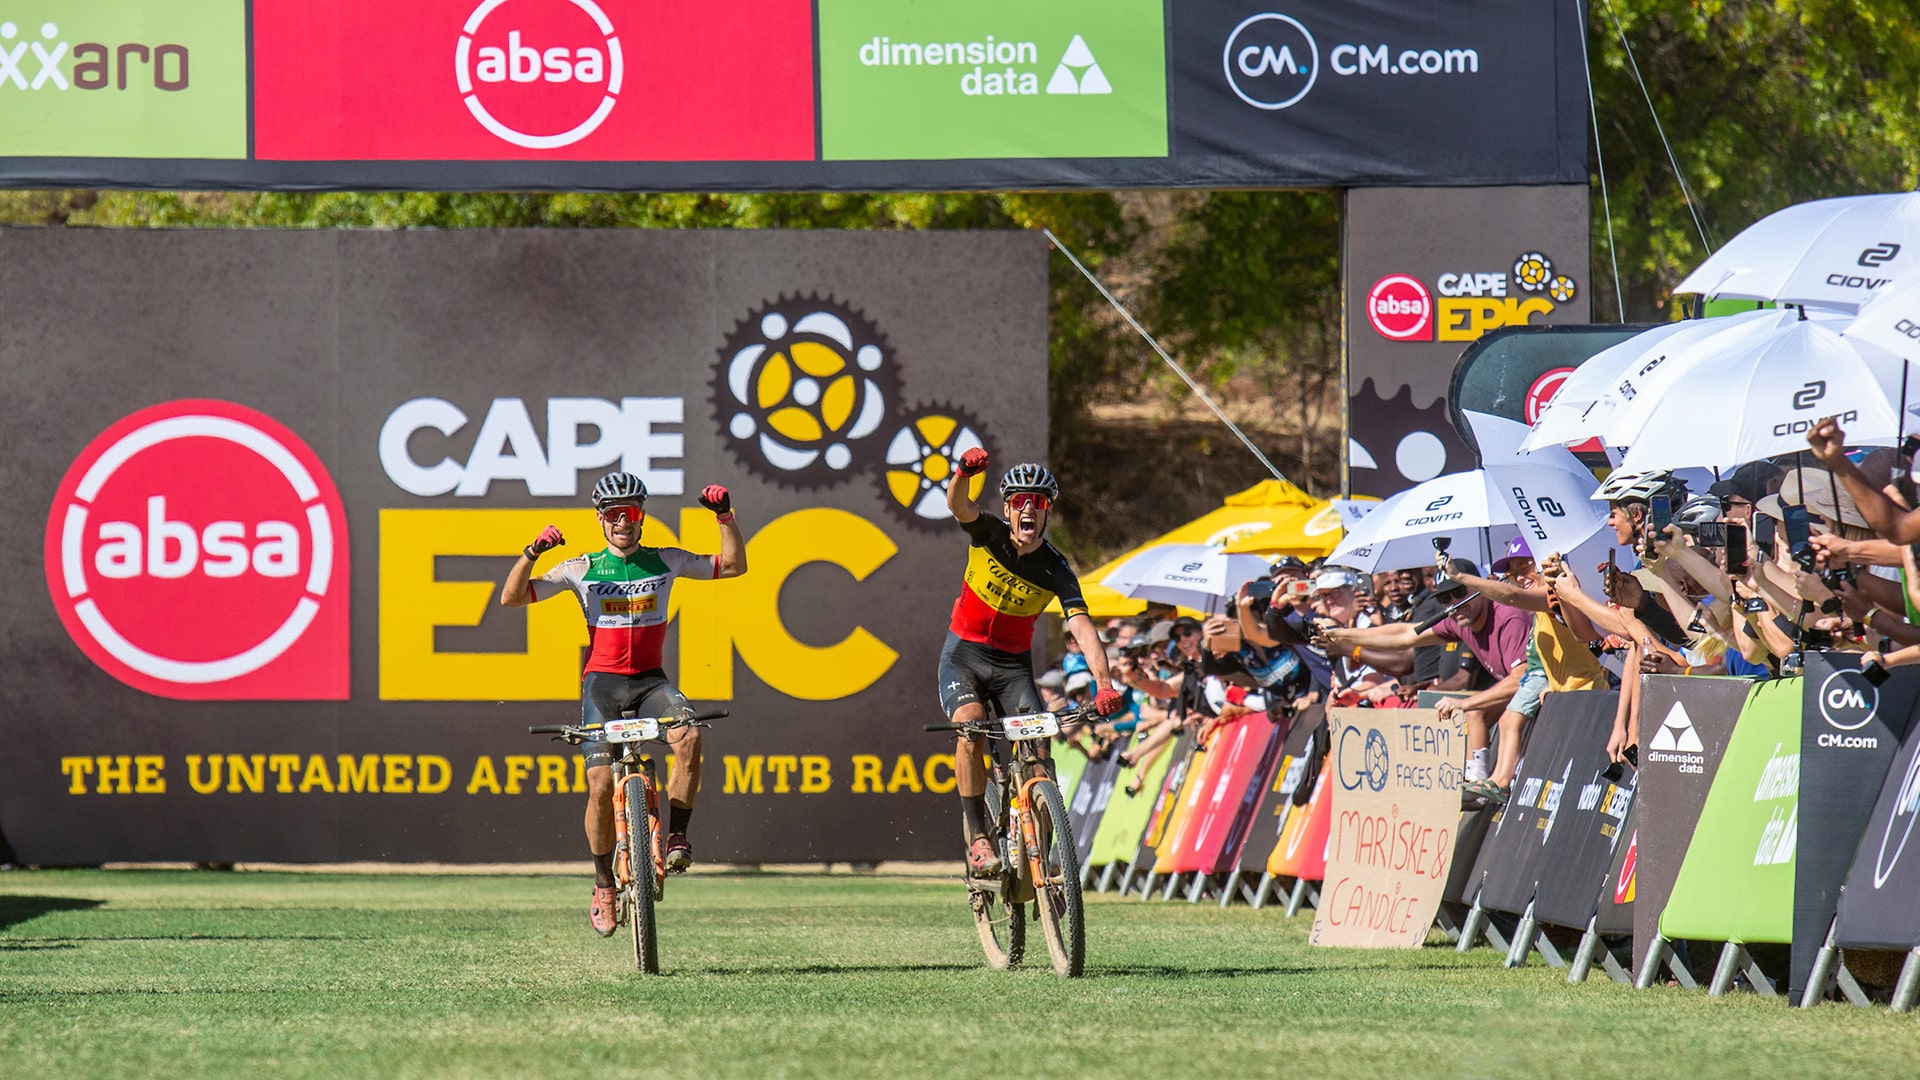 The epic South African race for Wilier Triestina – Pirelli MTB Factory Team.